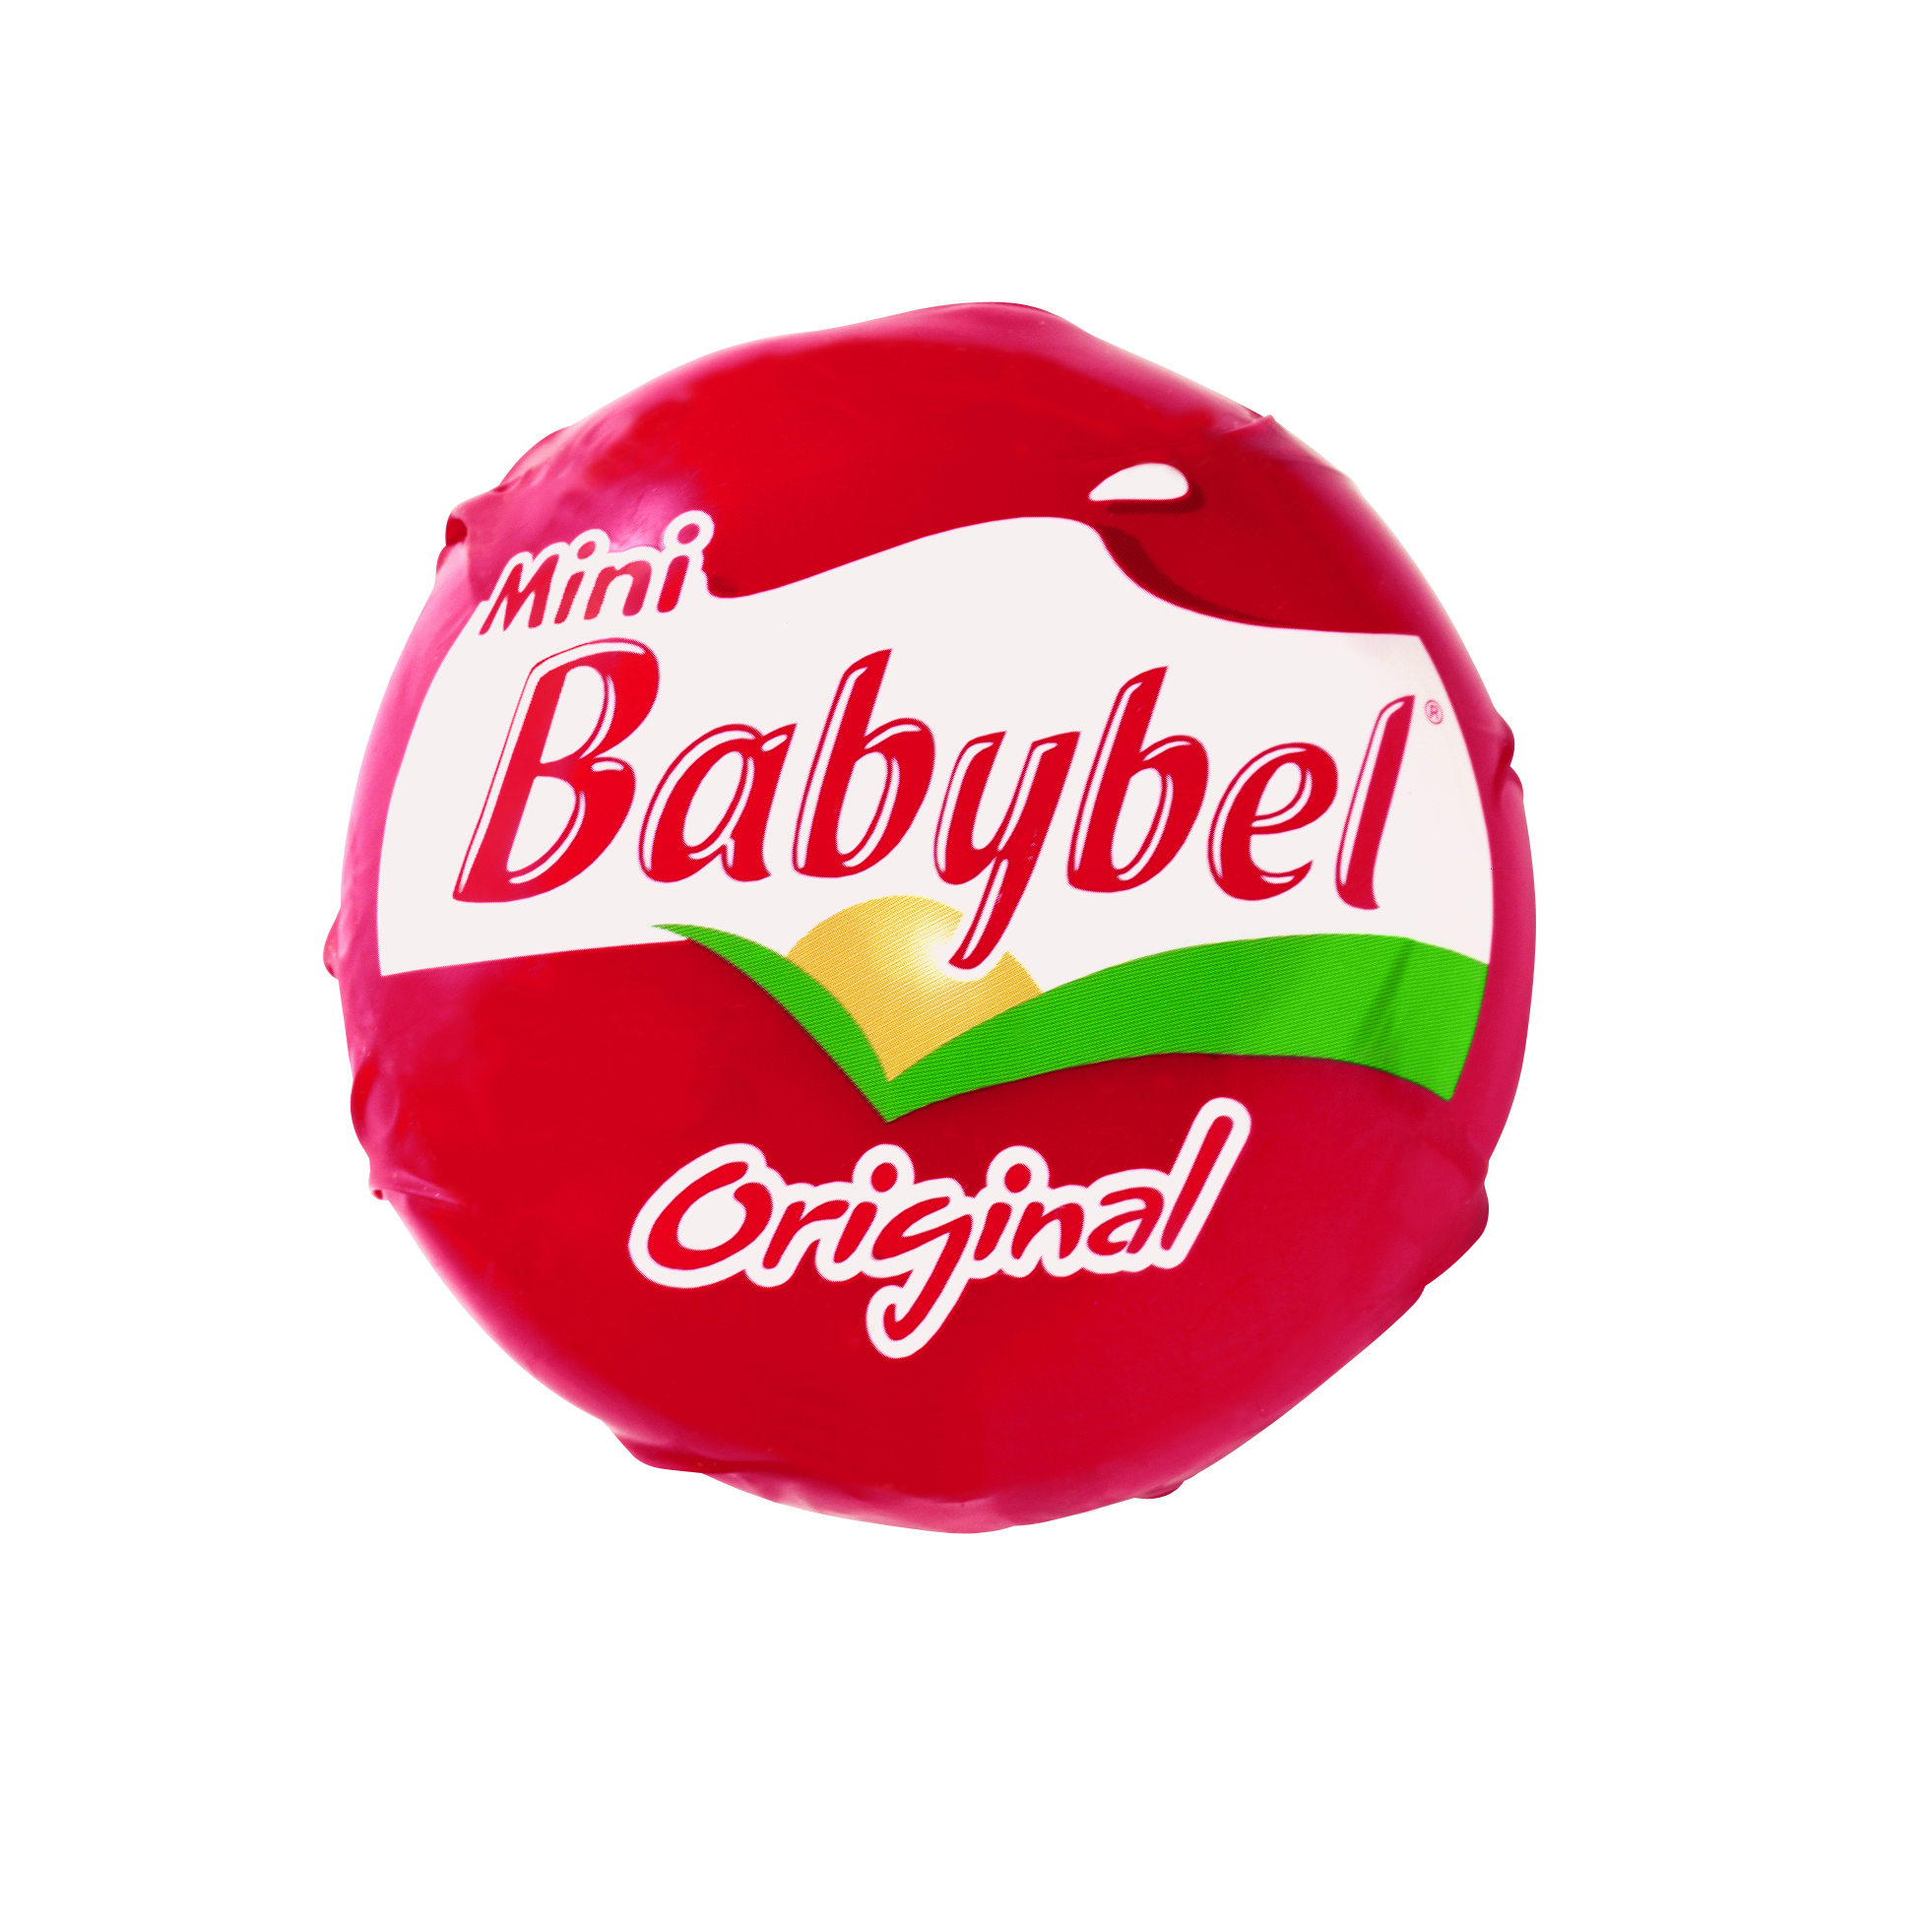 1.5 million Mini Babybels will be made at the Brookings plant each day when it reaches full capacity.